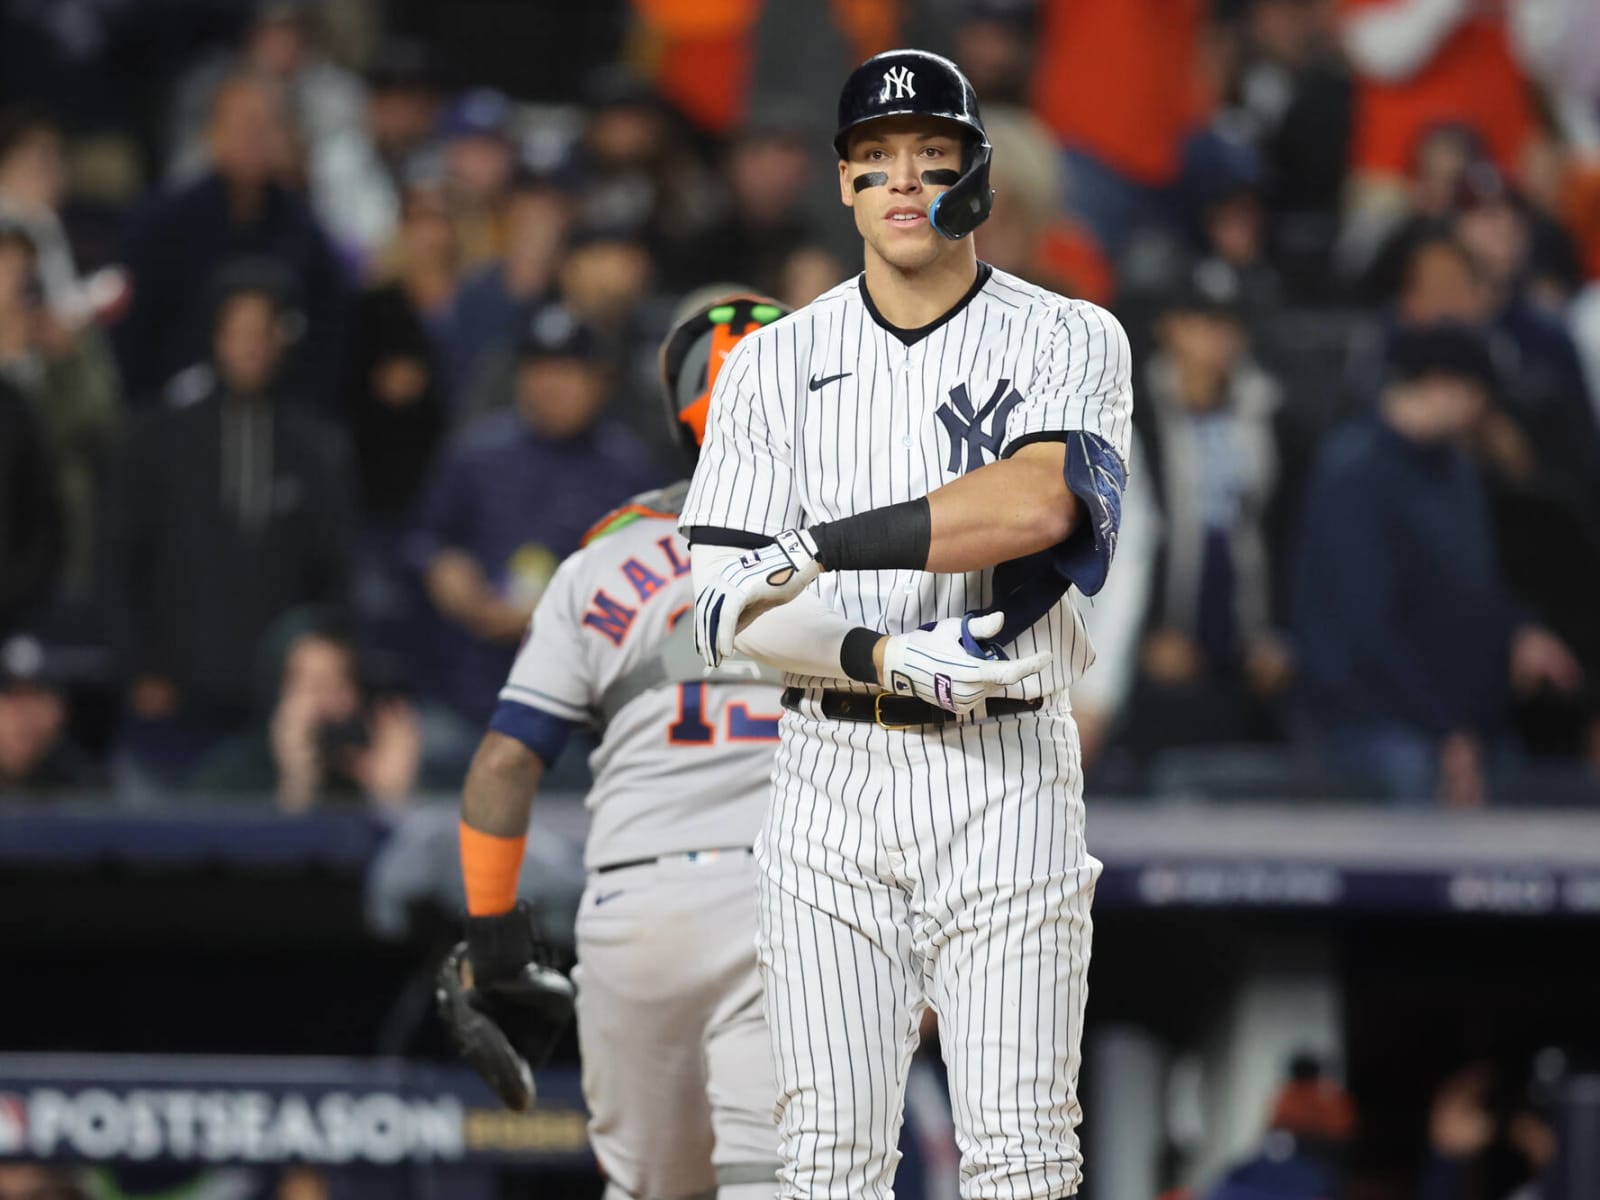 Giants optimism soars after meeting with Yankees' Aaron Judge